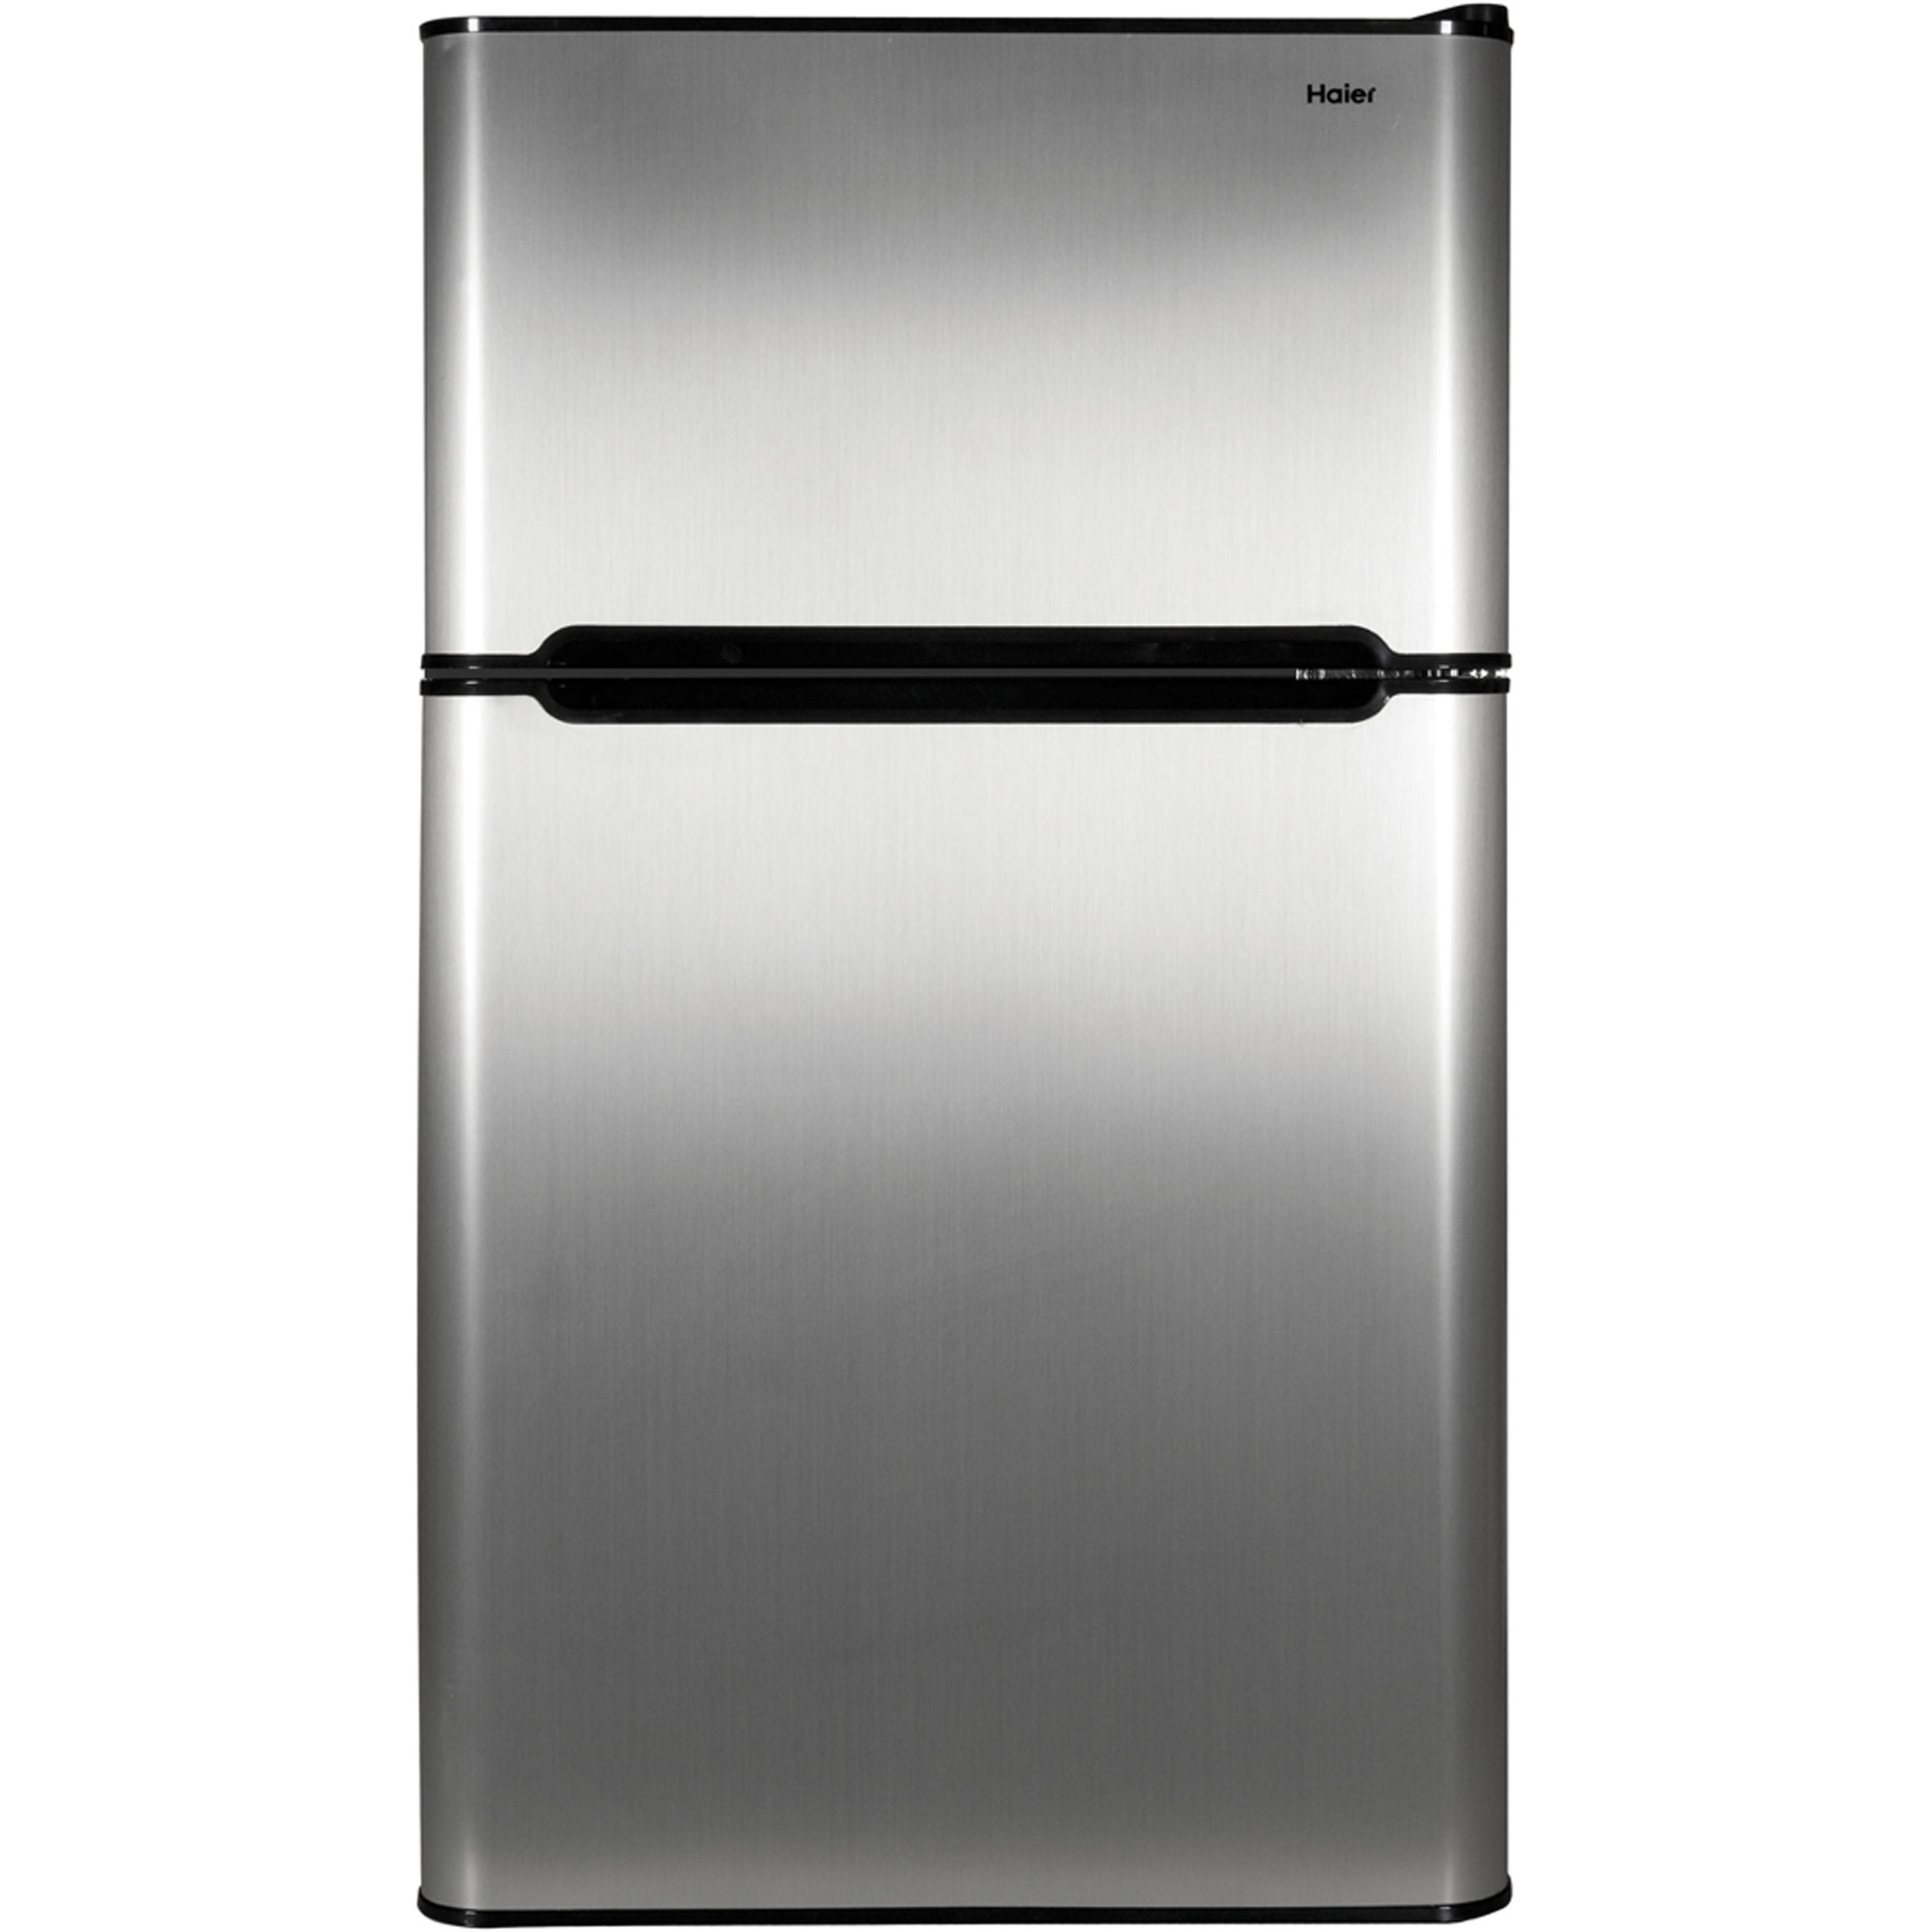 Review of Haier 3.2 Cu Ft Two Door Refrigerator with Freezer HC32TW10SV